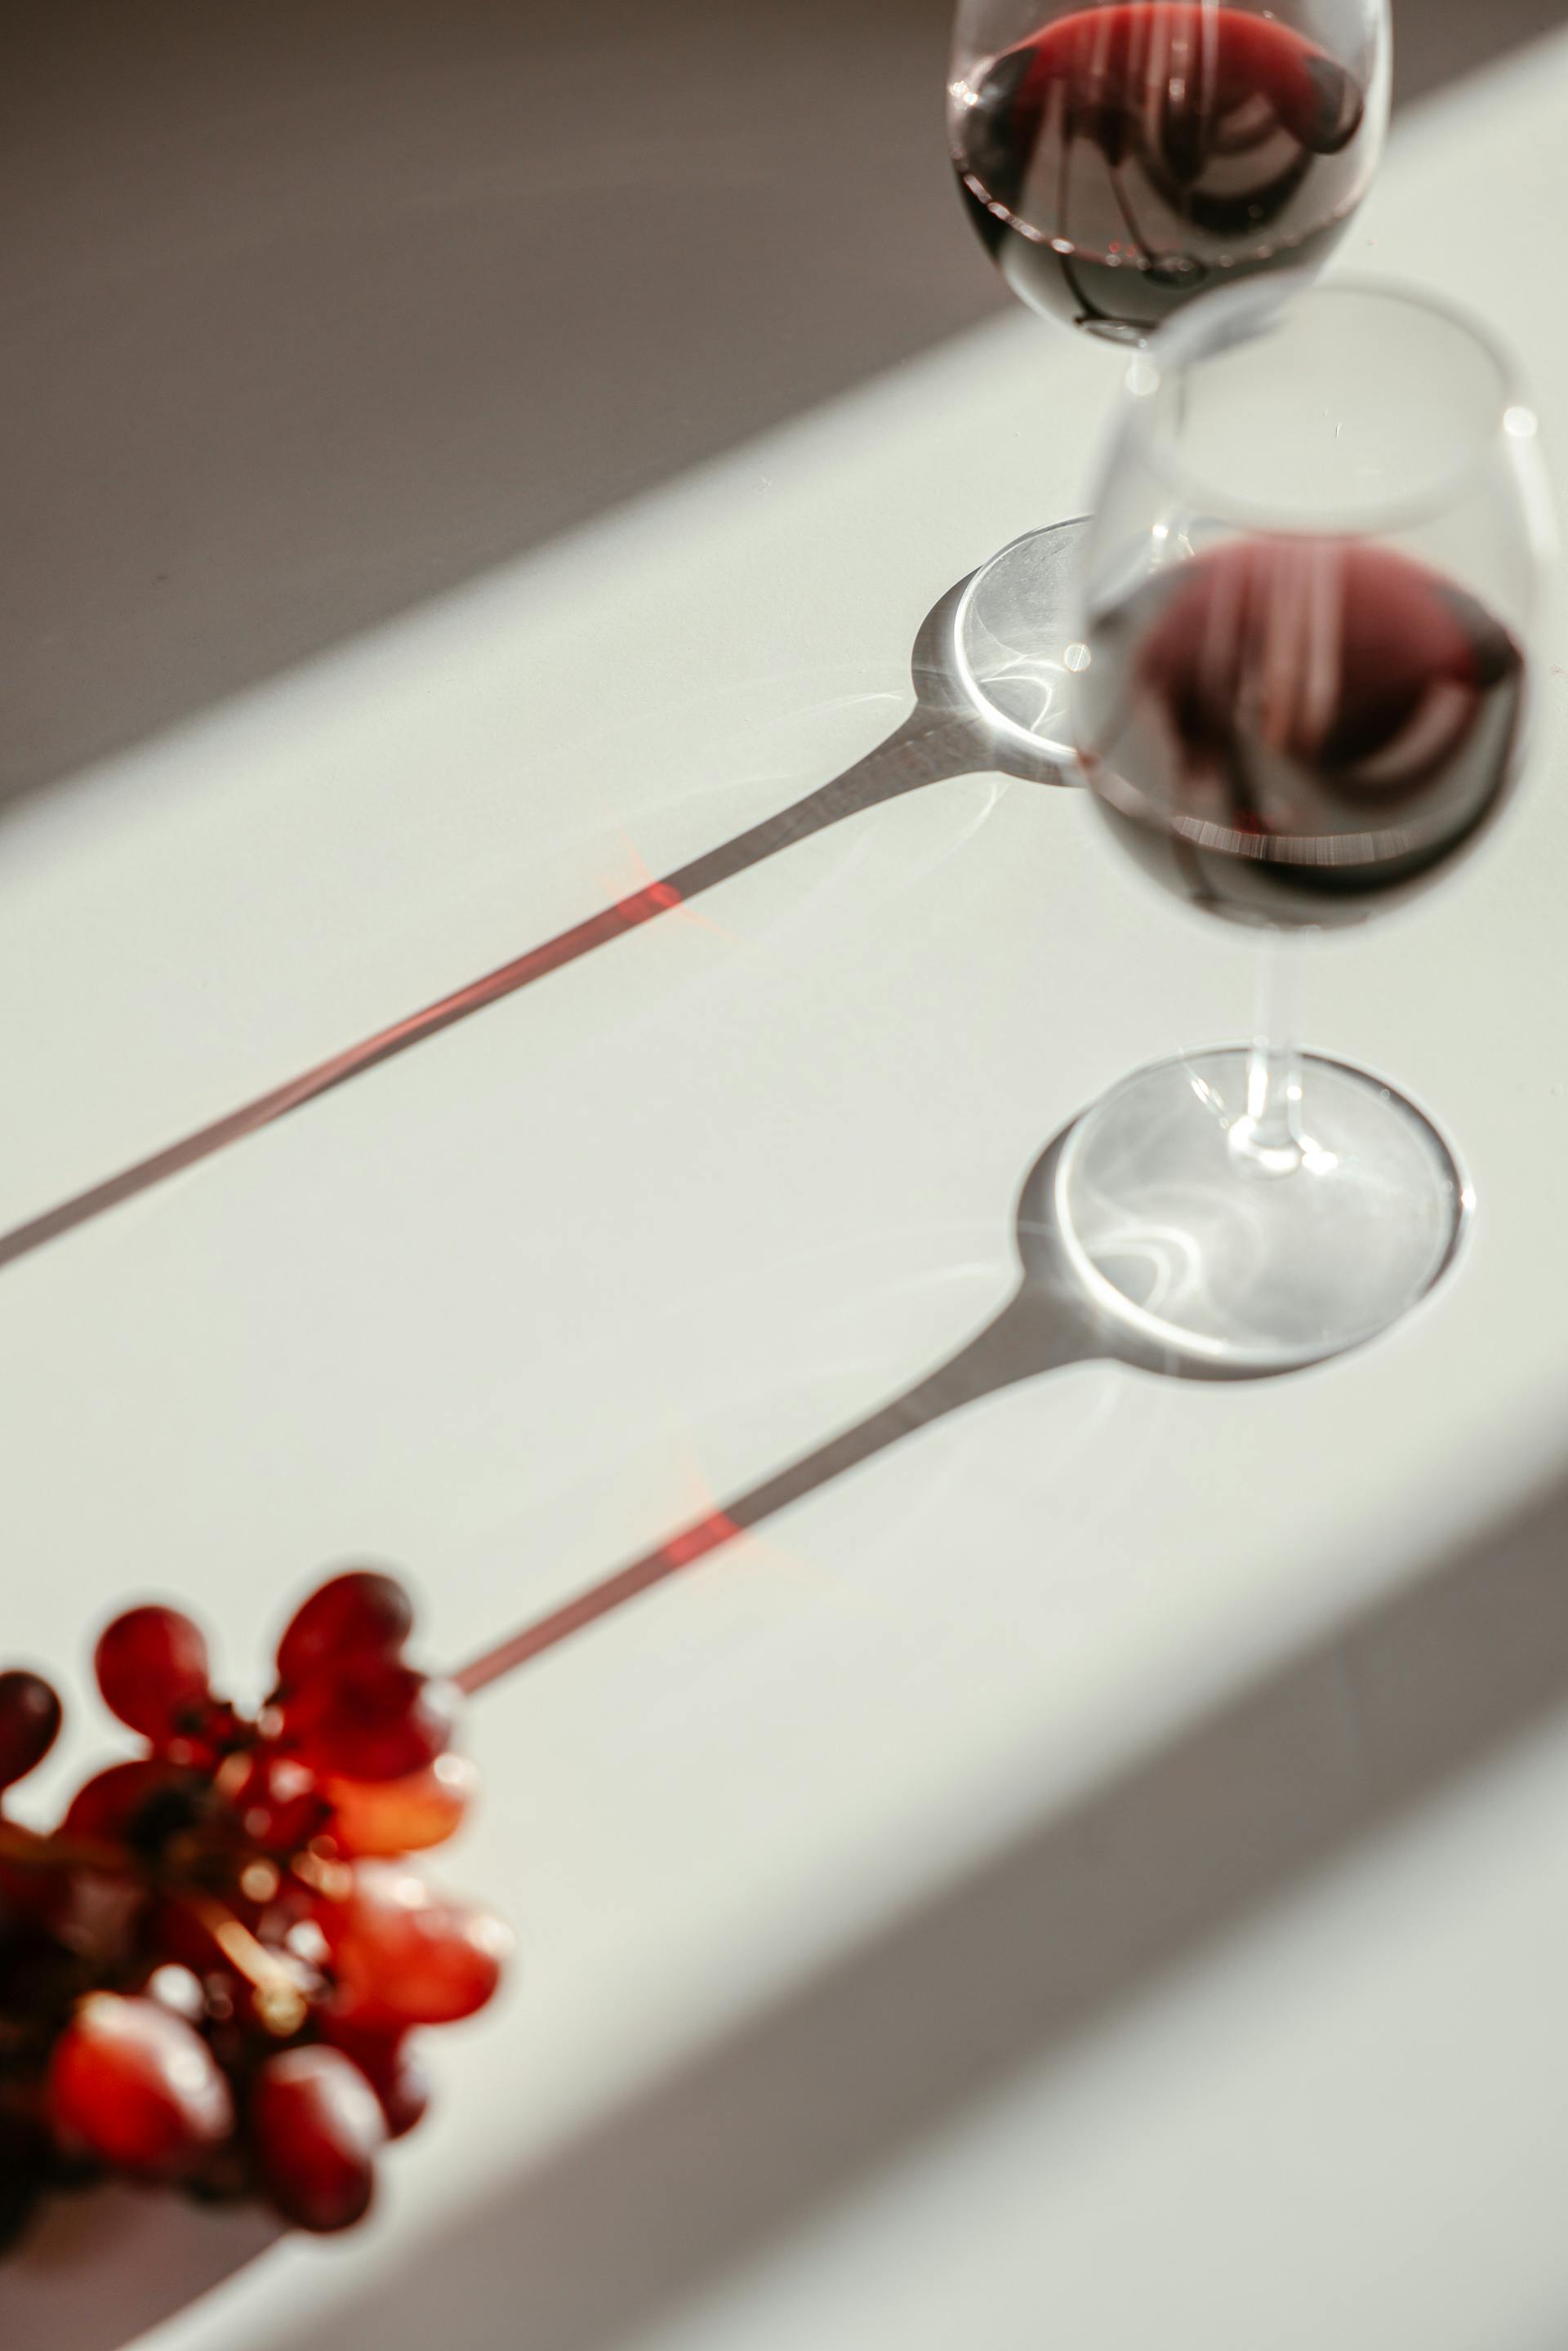 Wine glasses on a table | Source: Pexels